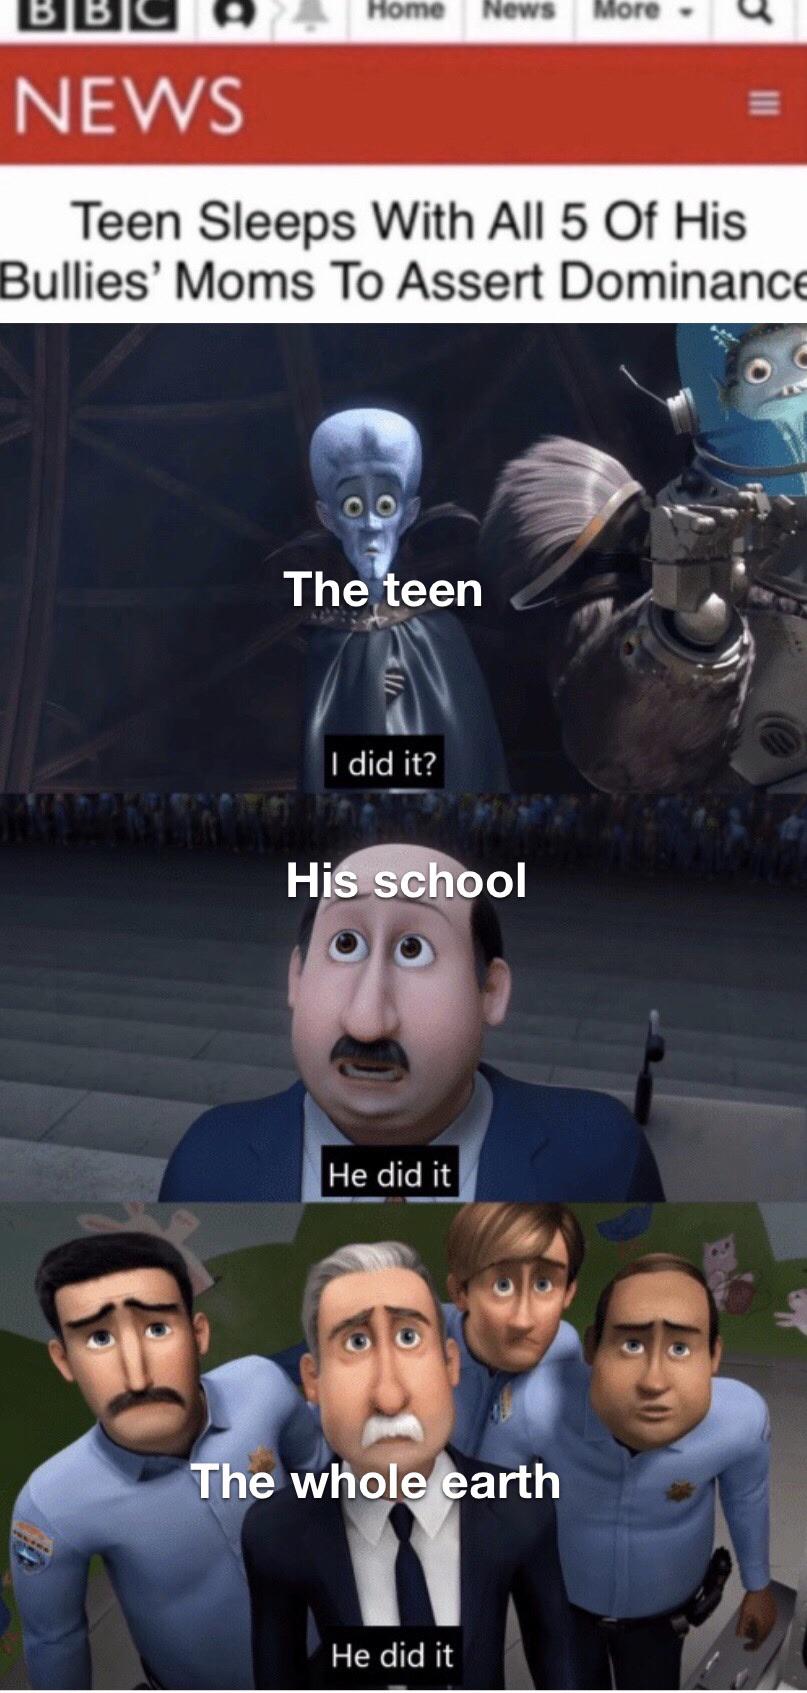 dank meme - he actually did it megamind - Bbc Home News More. U News Teen Sleeps With All 5 Of His Bullies' Moms To Assert Dominance The teen I did it? His school He did it 305 The whole earth He did it